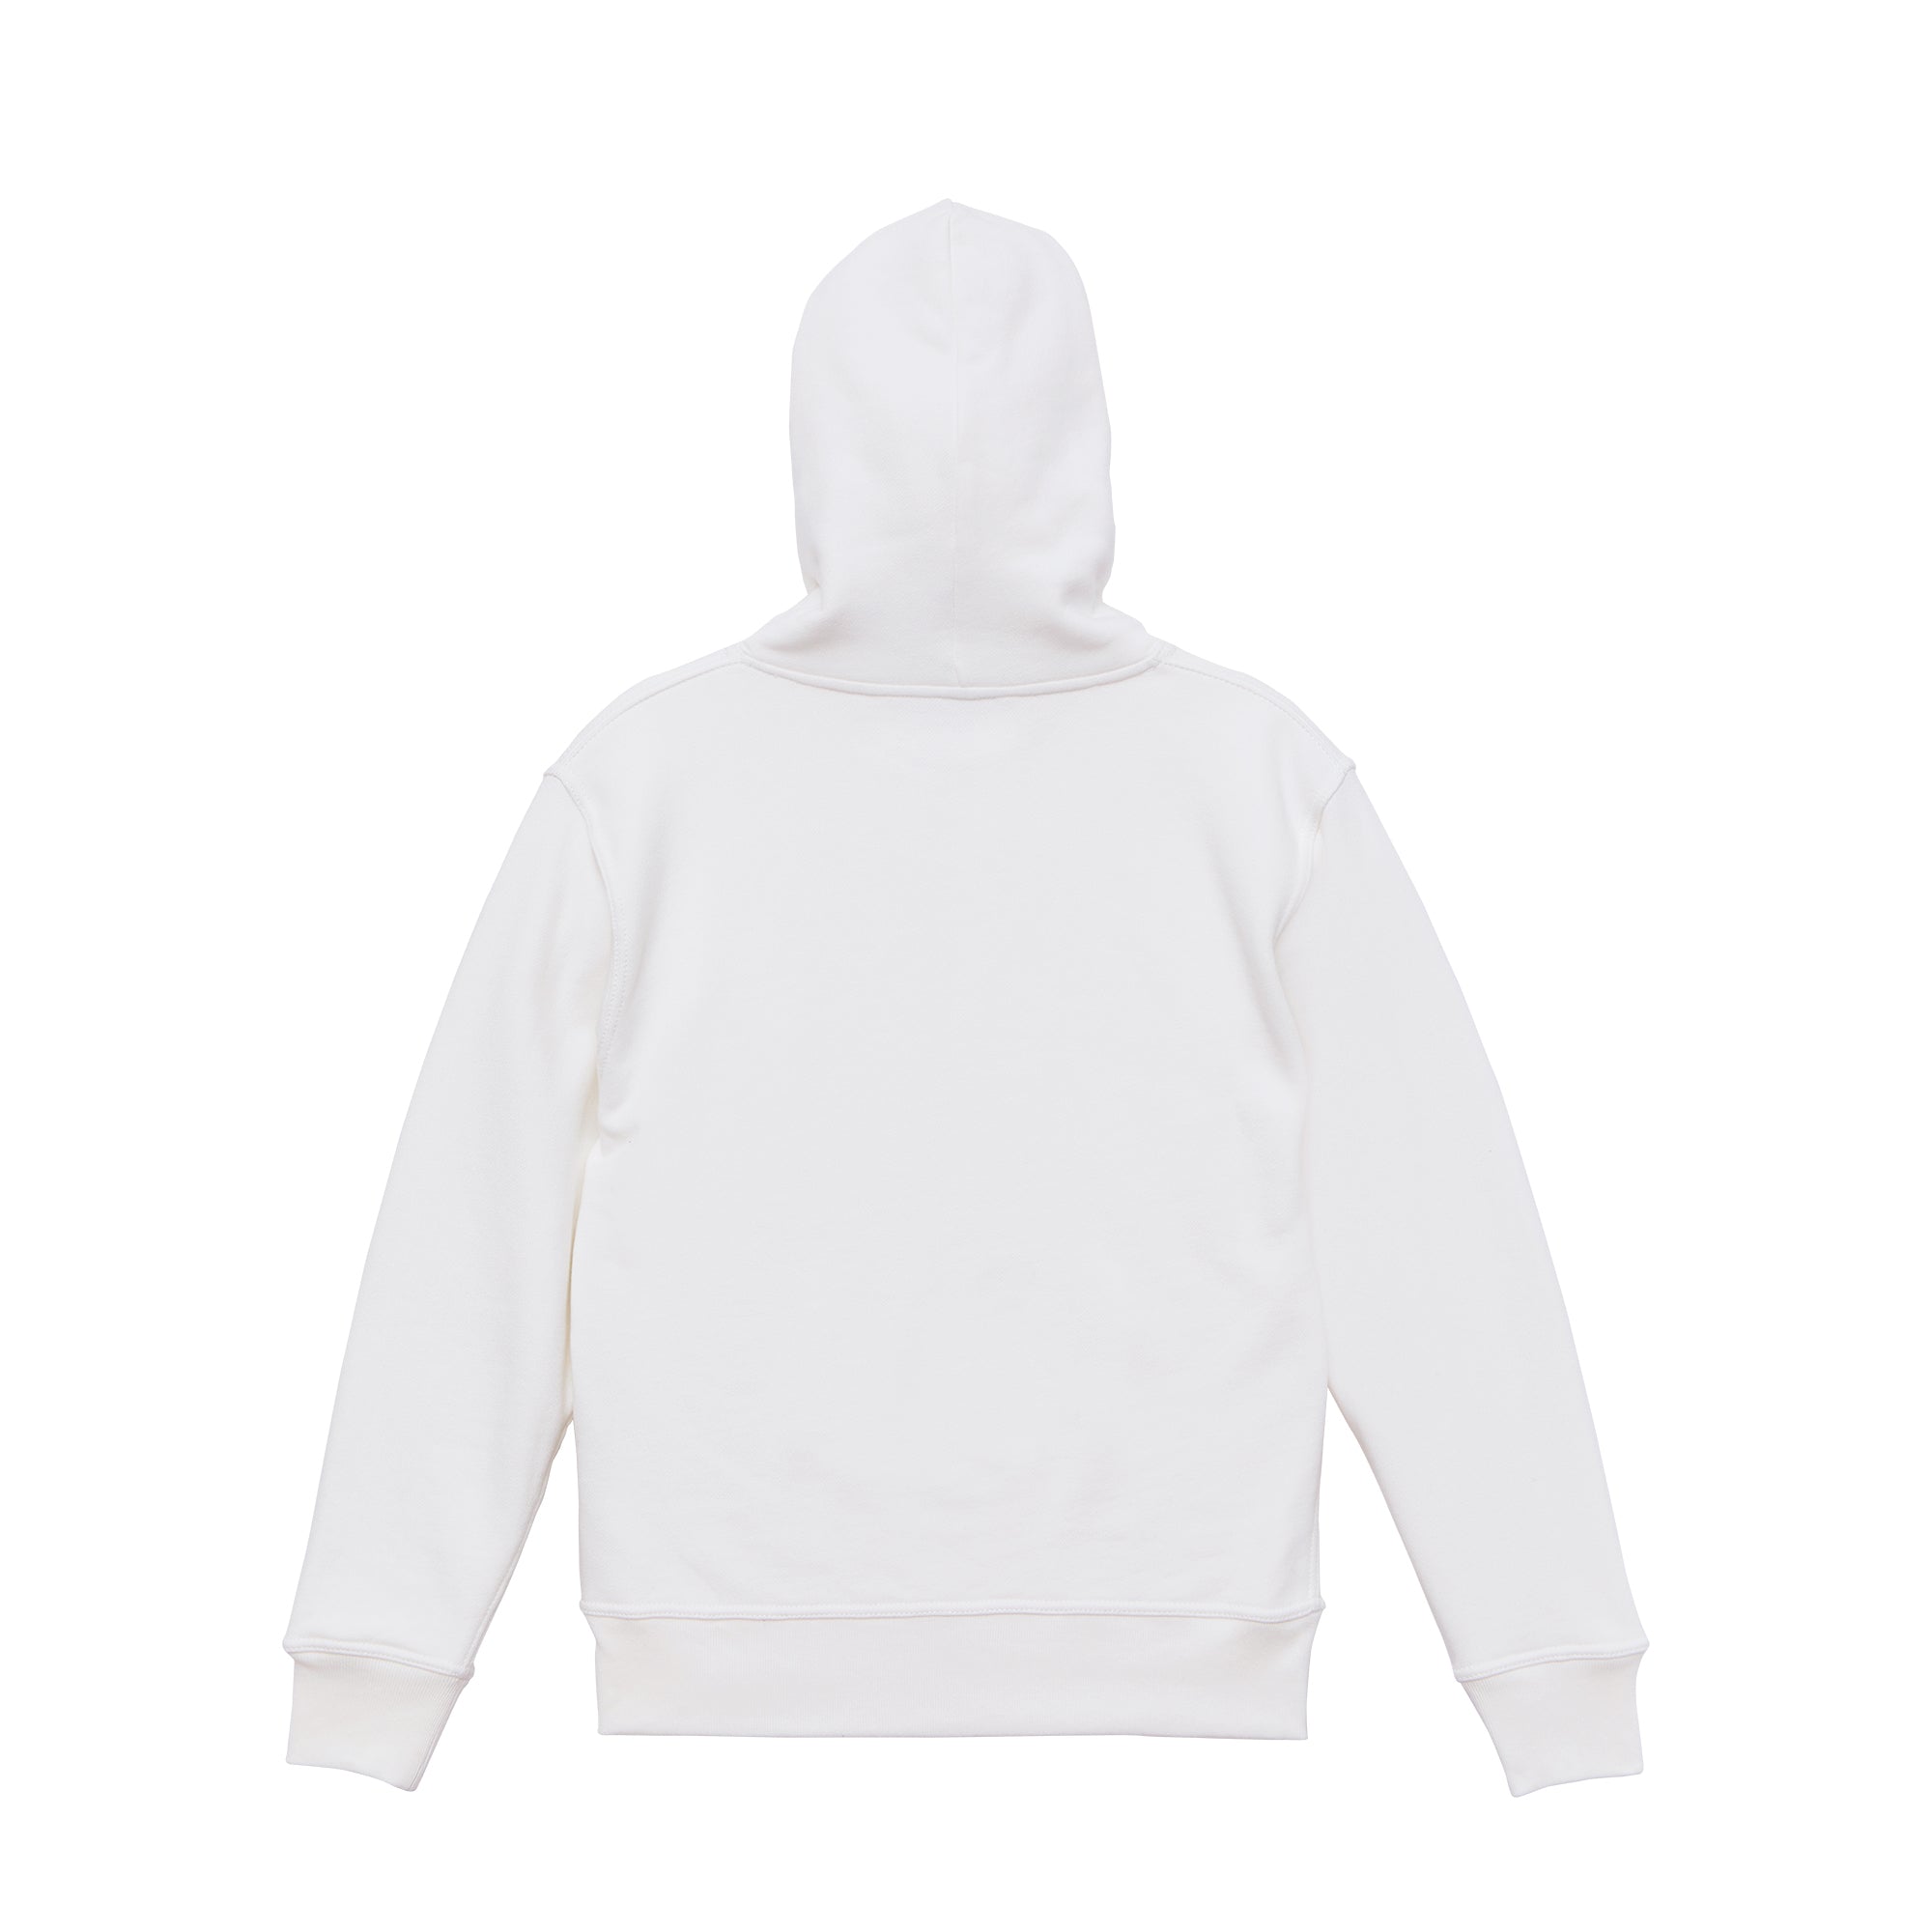 5768 - 12.7oz heavy weight sweat pullover Hoodie - Off White x 2